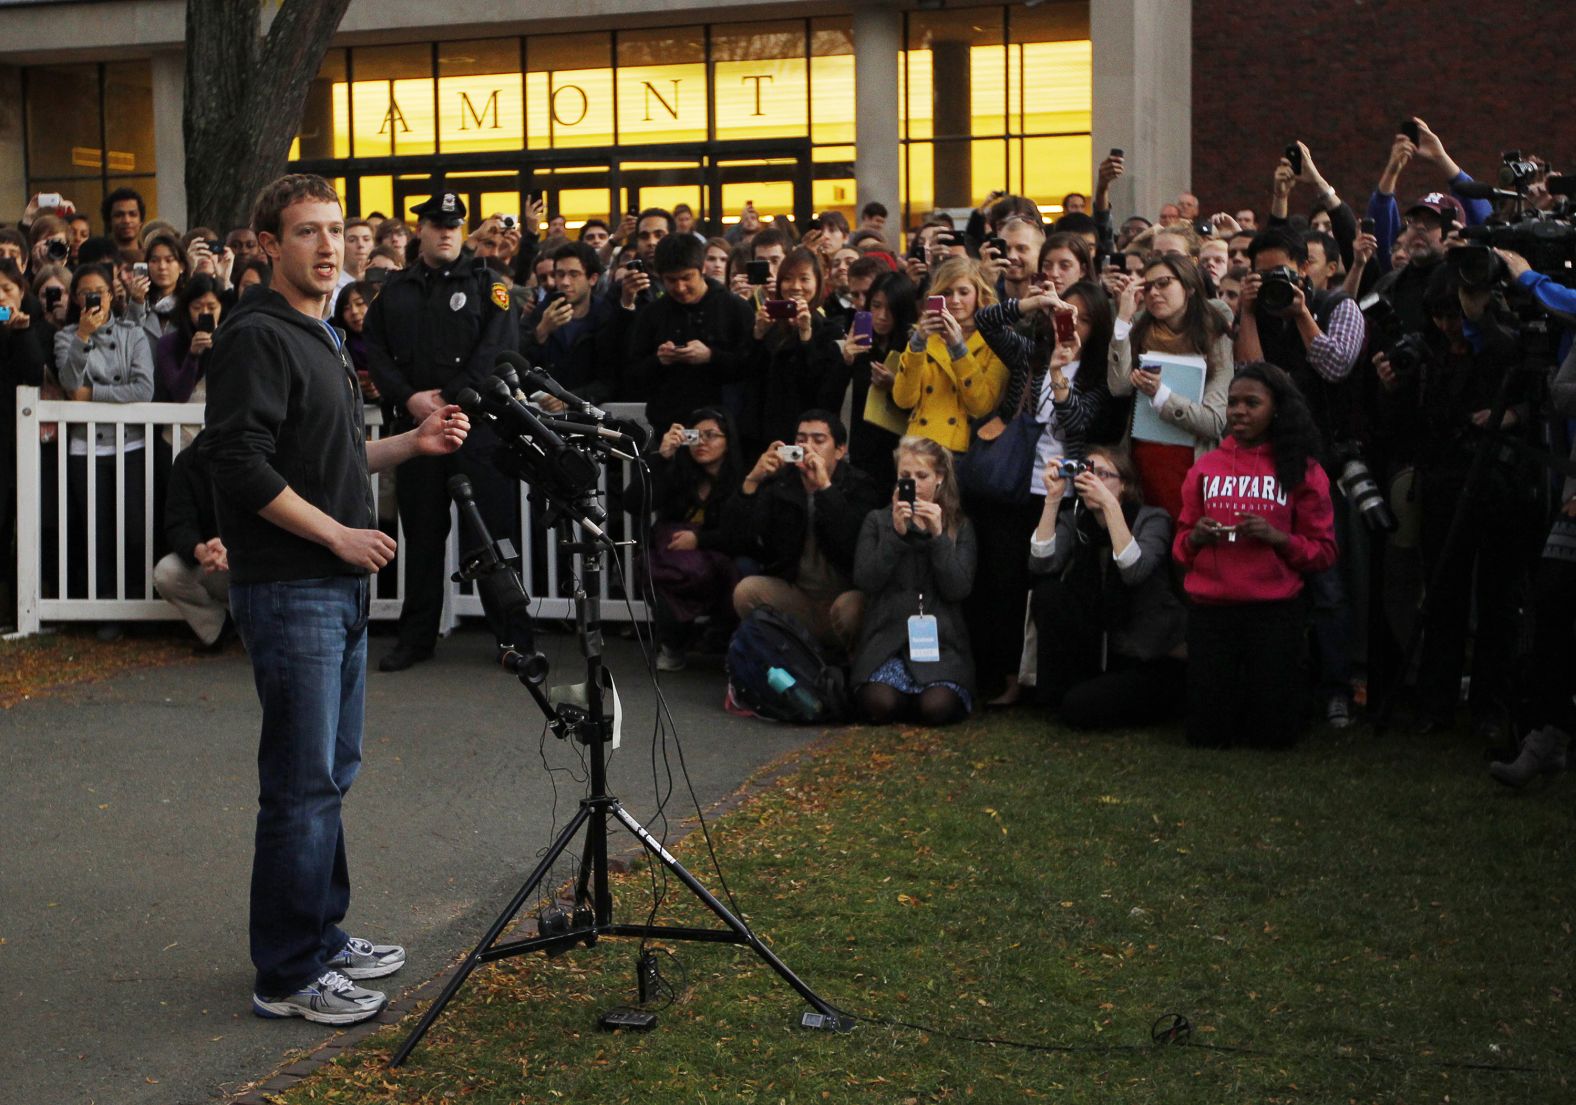 Students gather to listen as Zuckerberg speaks to reporters at Harvard University in November 2011. Zuckerberg was visiting Harvard and the Massachusetts Institute of Technology to recruit students for Facebook.  